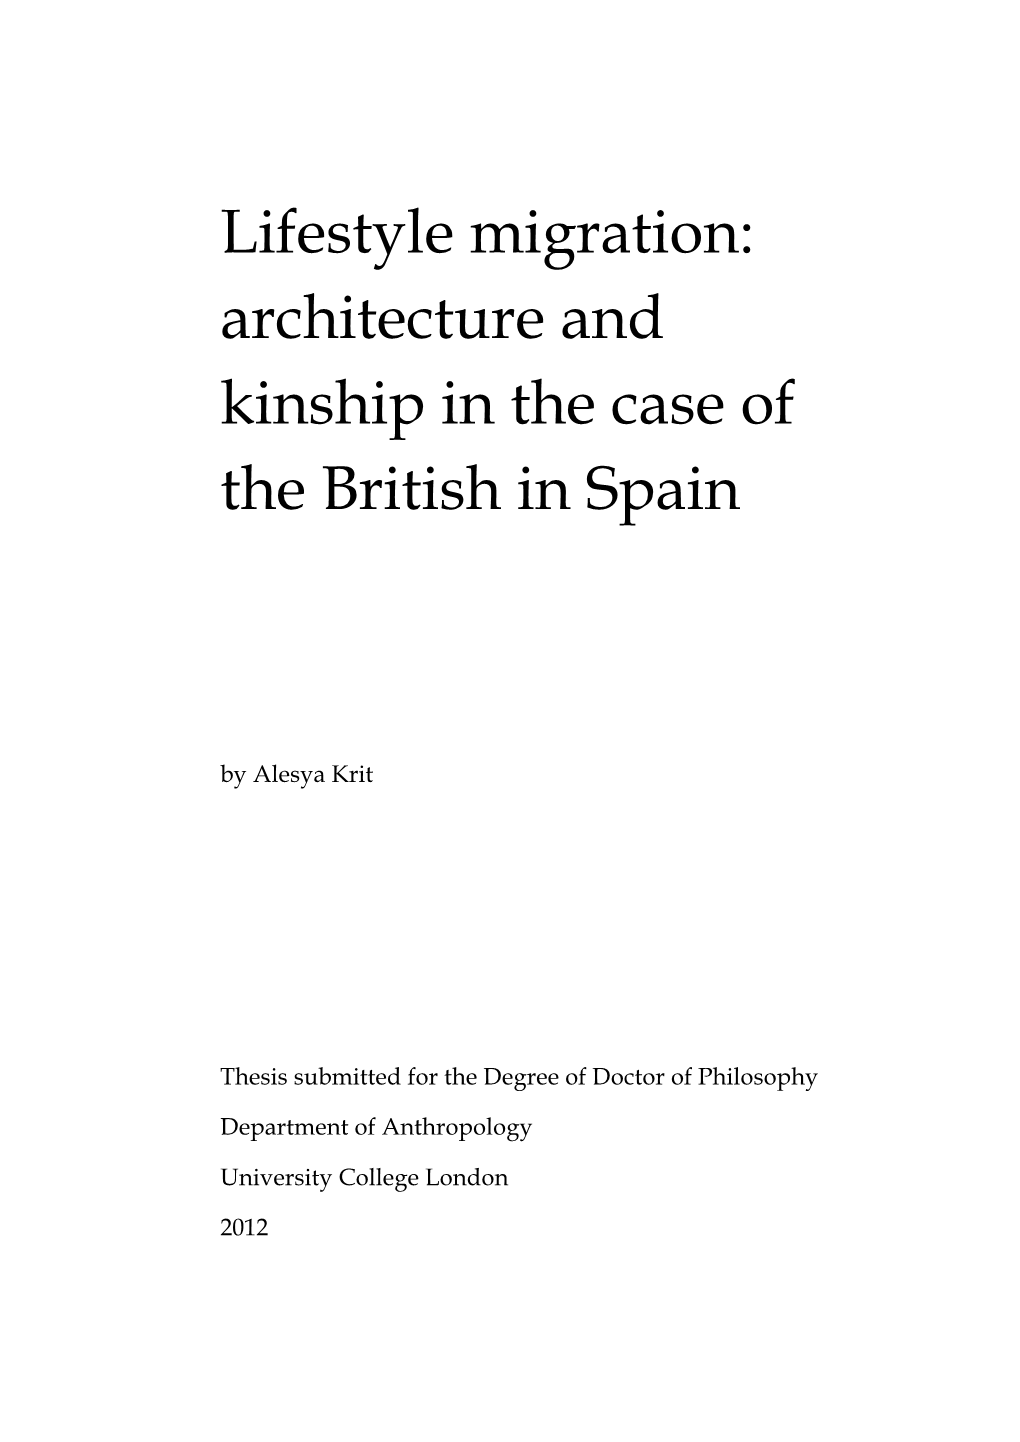 Lifestyle Migration: Architecture and Kinship in the Case of the British in Spain